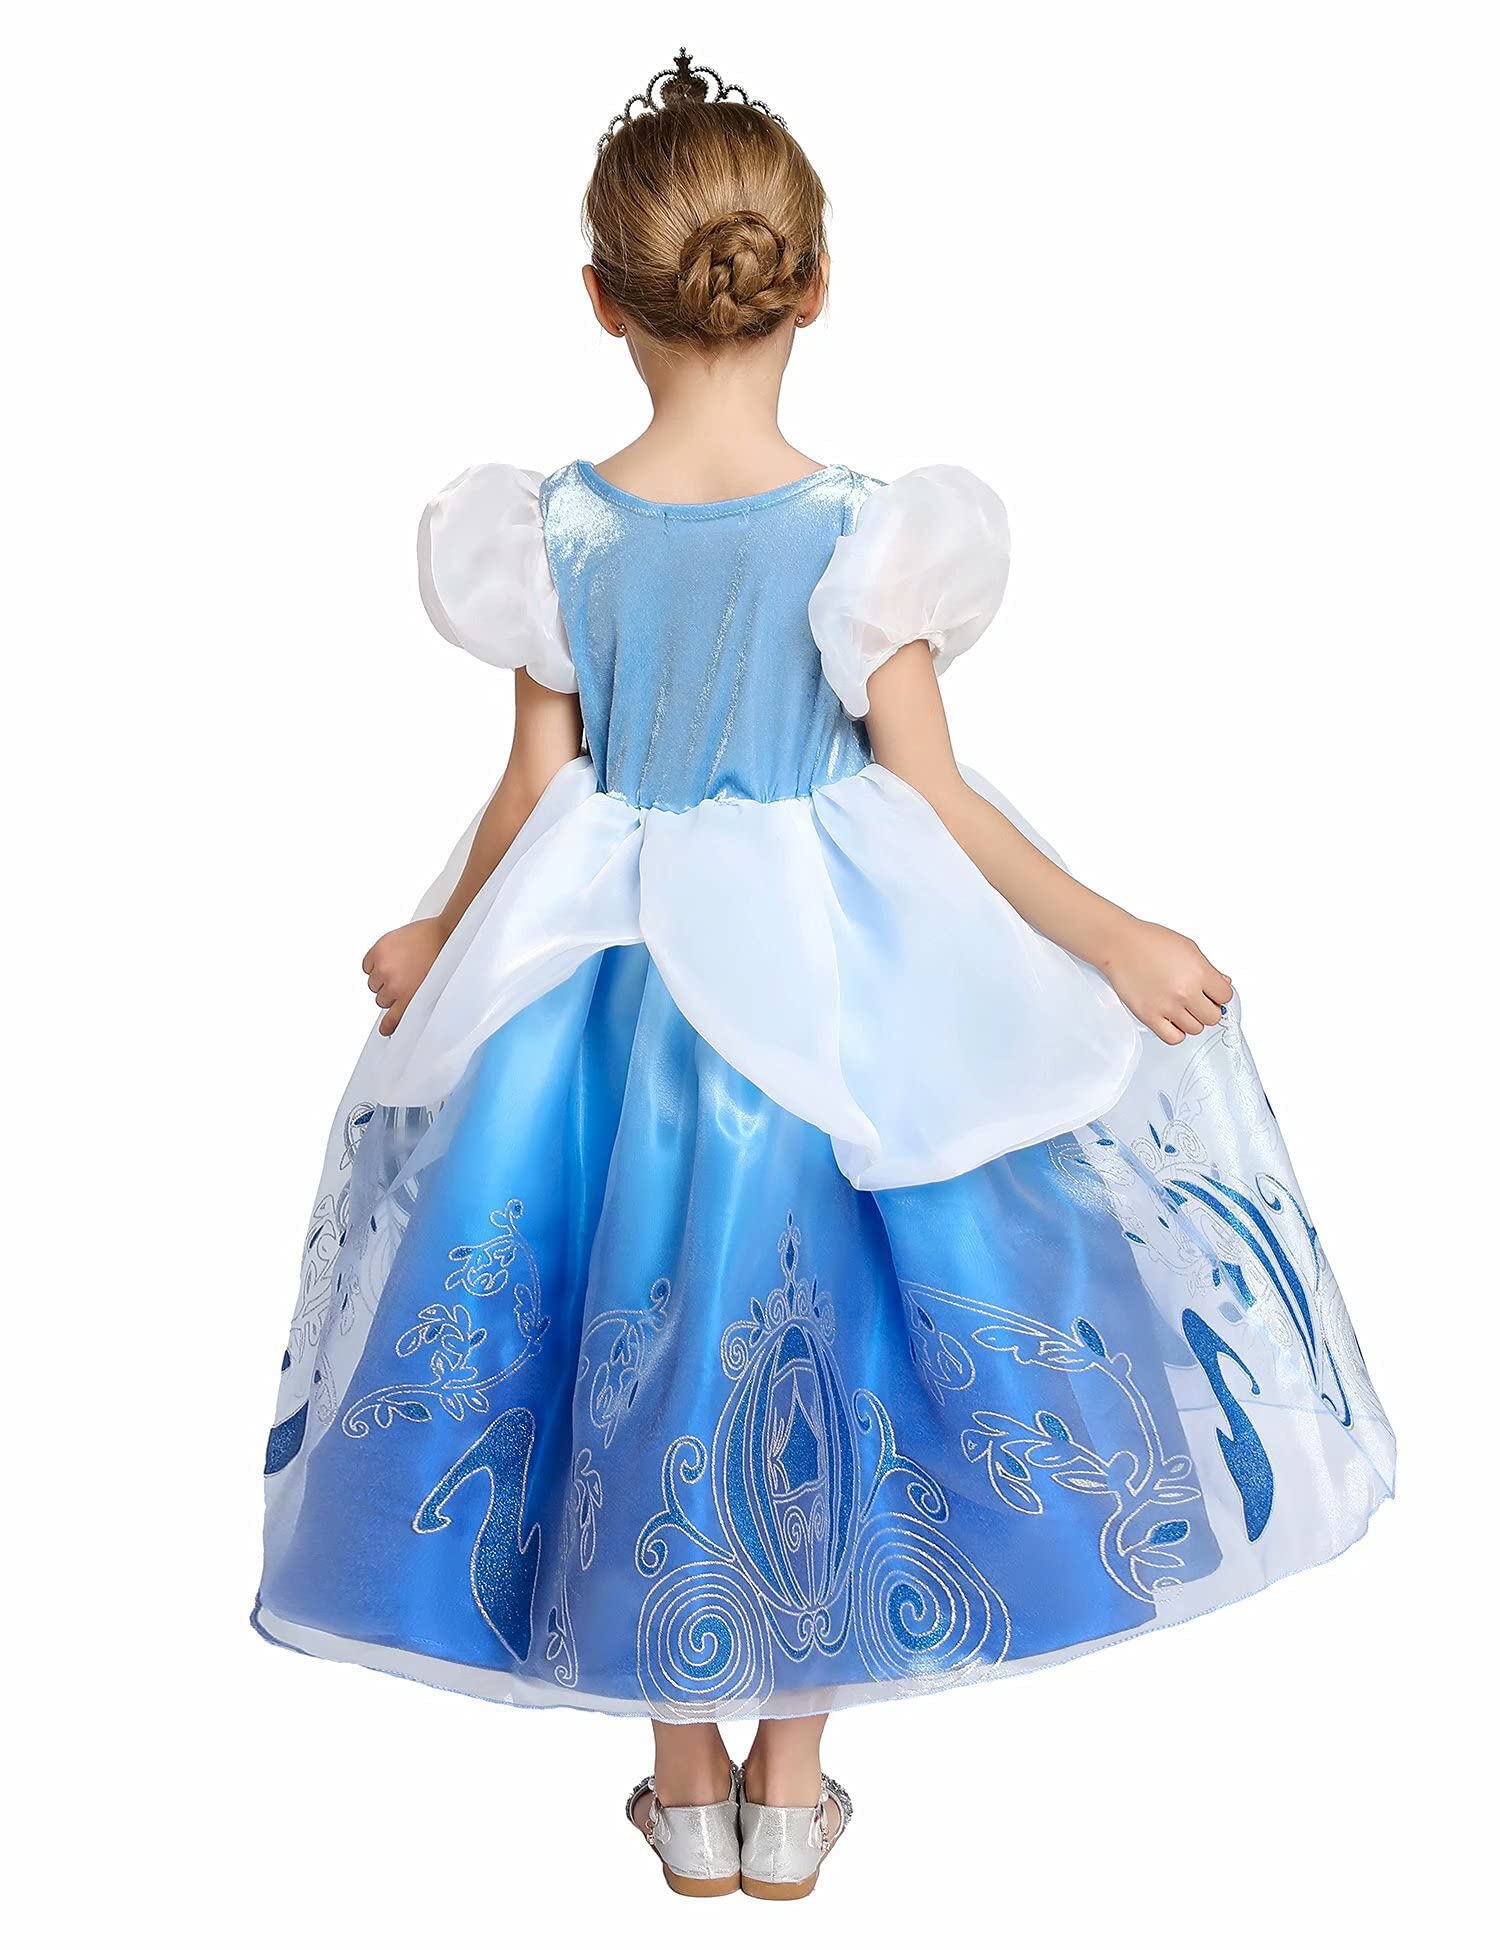 Kidswant Toddler Baby Girls Luxury Princess Party Halloween Cosplay Costume Dress Up with Accessorries